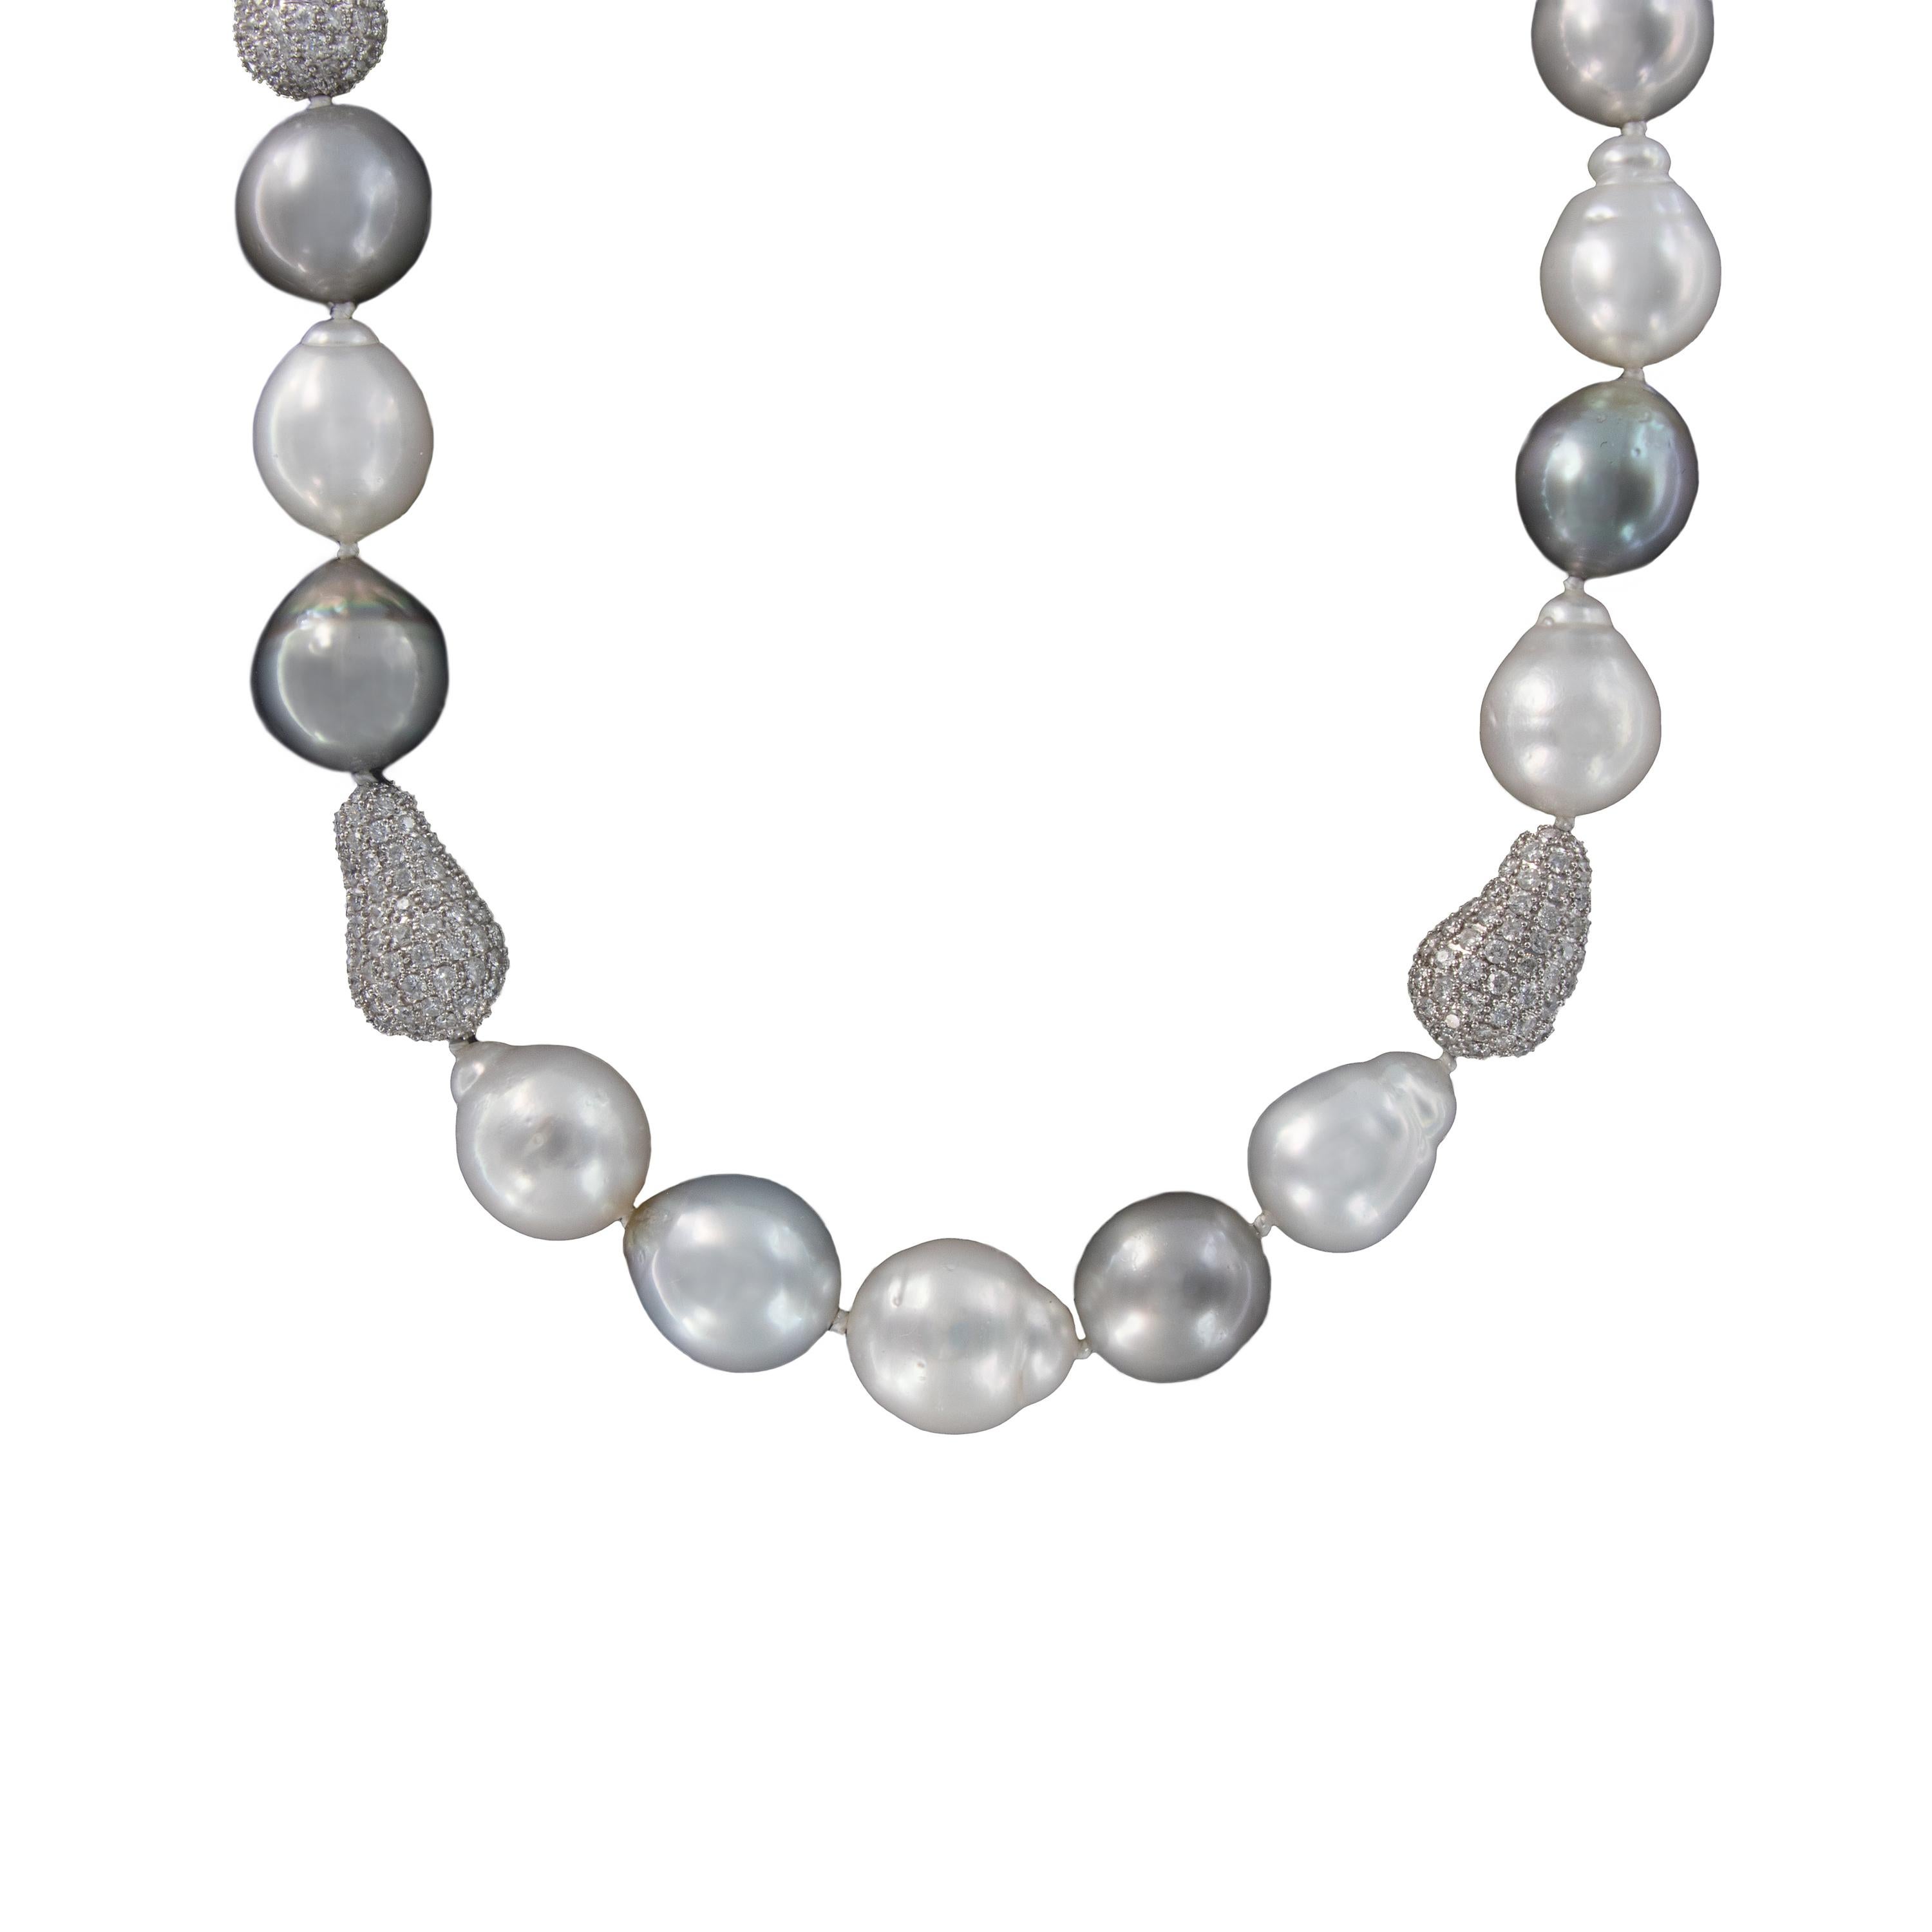 Necklace is comprised of beautifully iridescent white and silver South Sea Baroque pearls with diamond bean enhancers. 18.5 inches in length. Weighs 101.1 grams.
